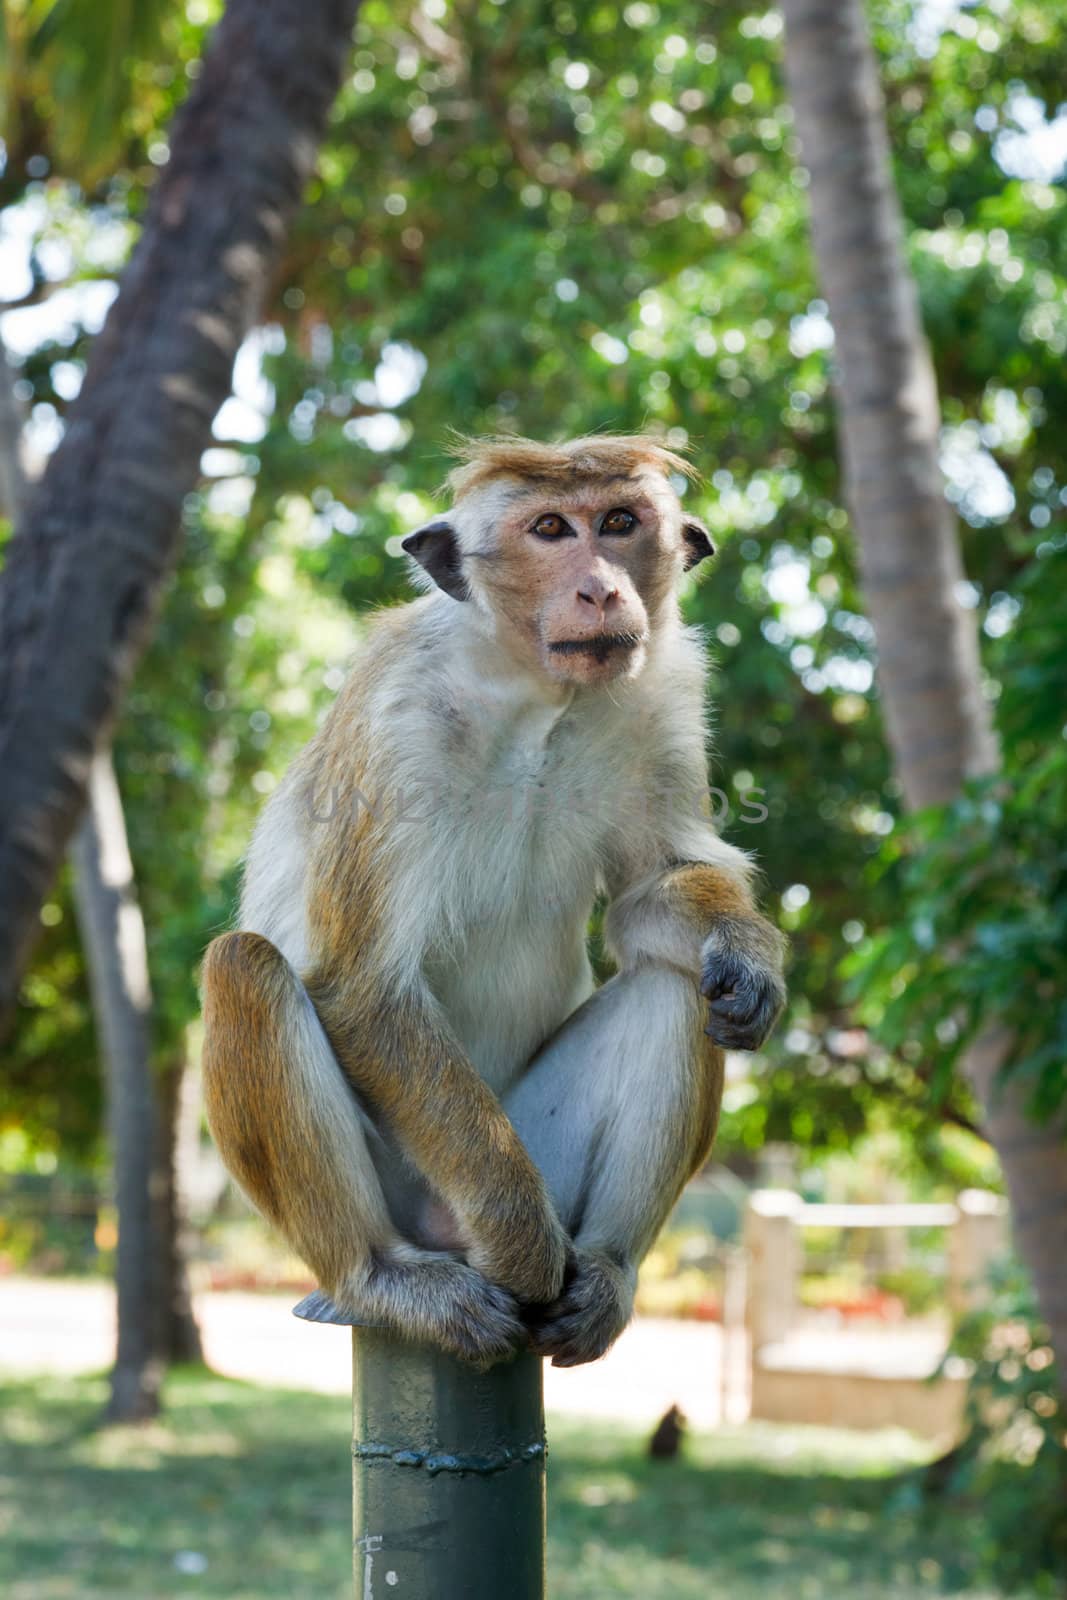 Long tailed macaque by dimol